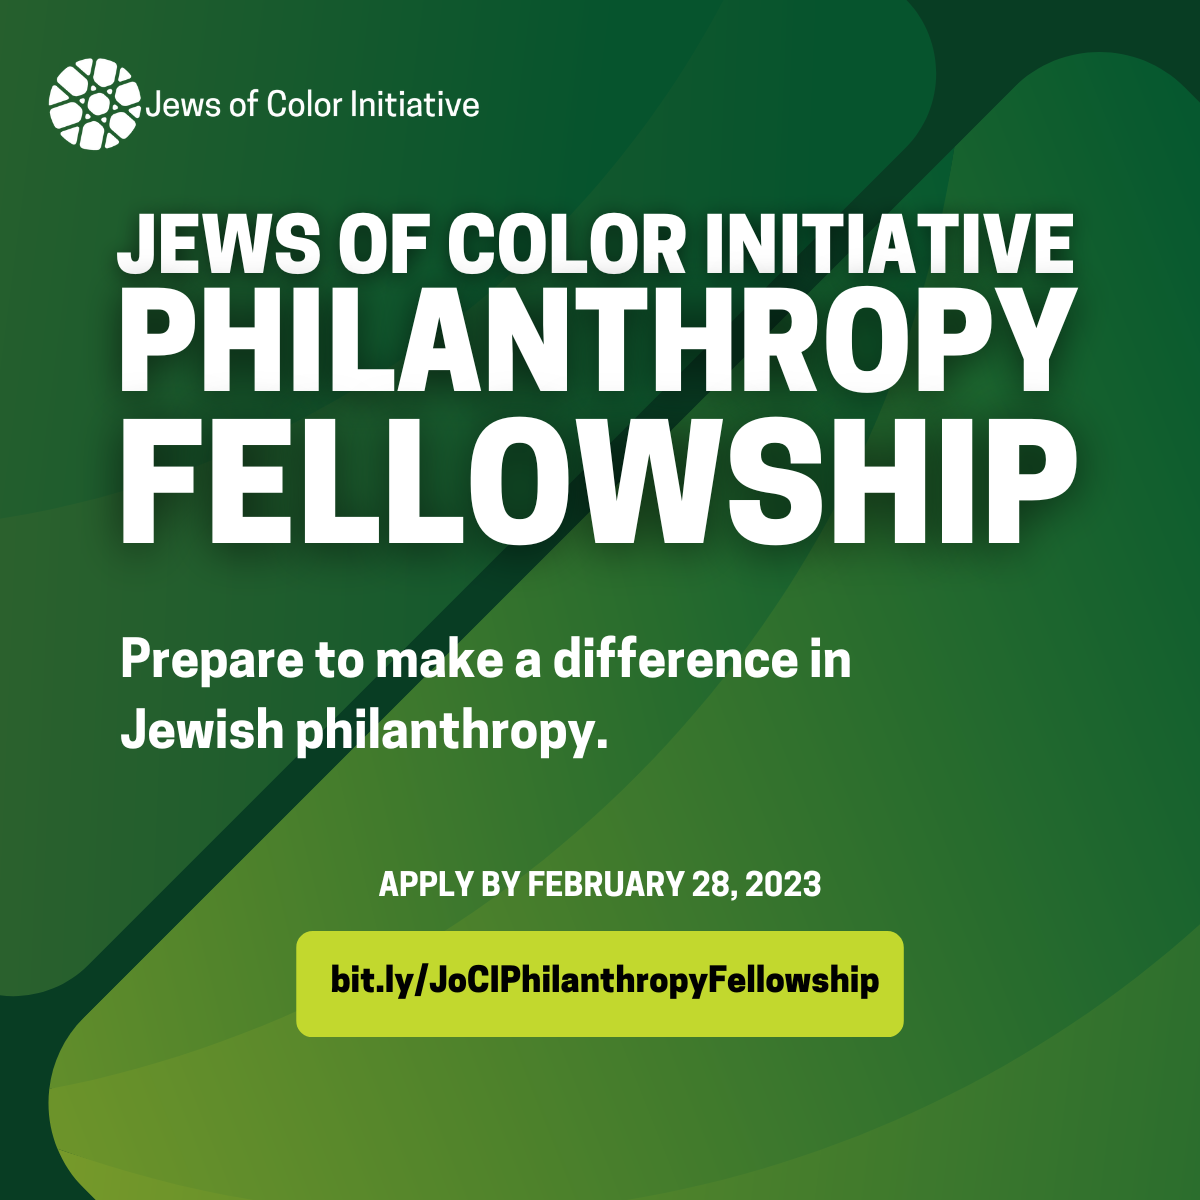 Jews of Color Initiative Philanthropy Fellowship; Prepare to make a difference in Jewish philanthropy. Apply by February 28, 2023; https://bit.ly/JoCIPhilanthropyFellowship